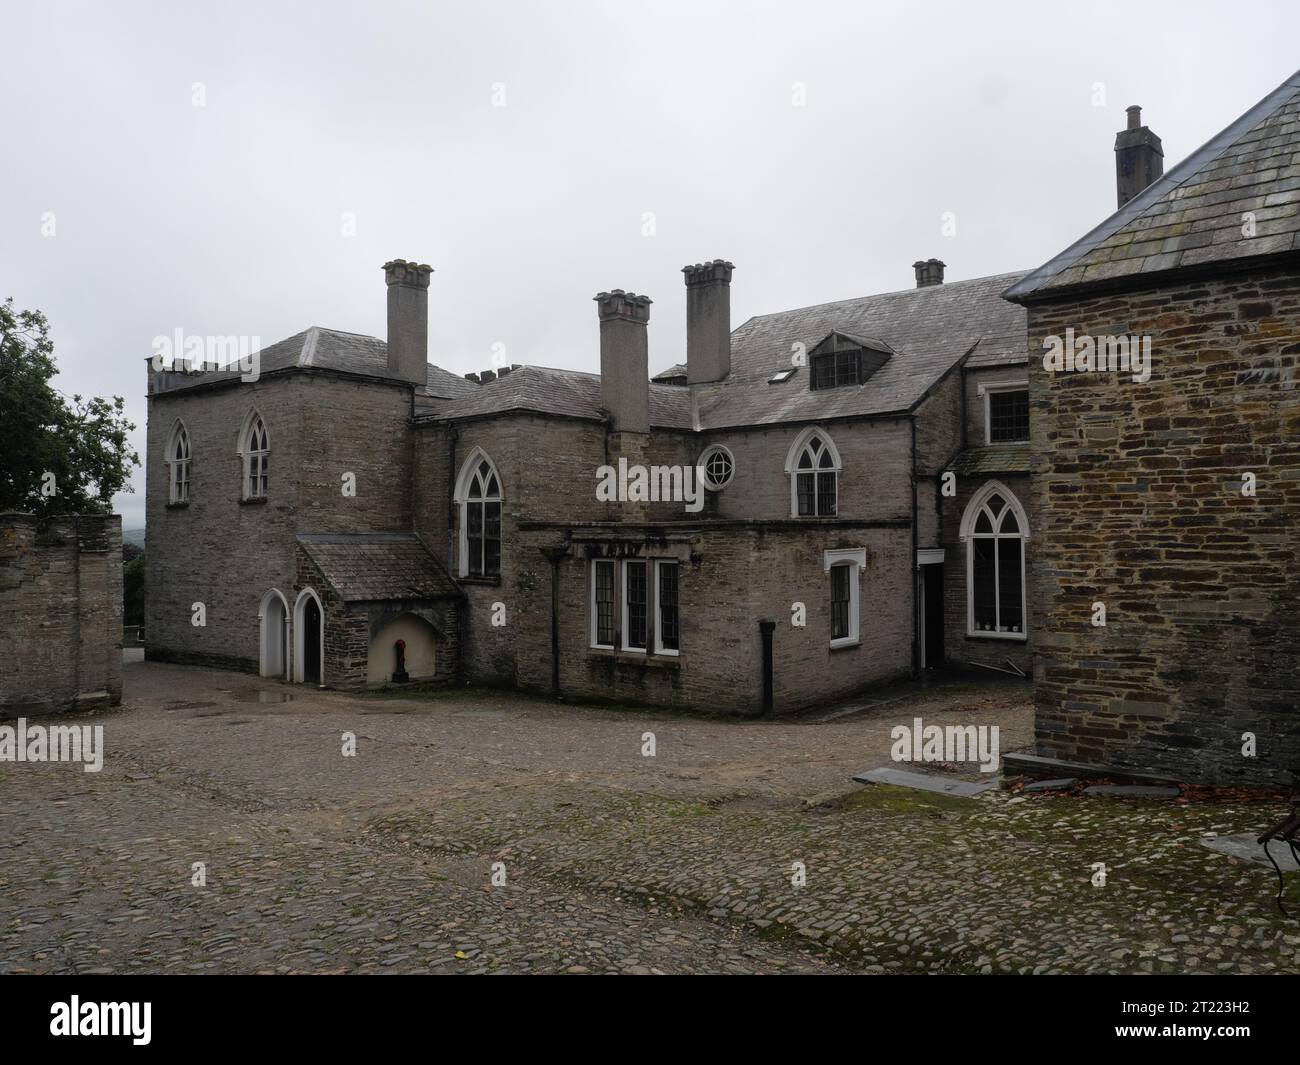 The old manor house in Prideaux Place, Padstow, Cornwall, England Stock Photo